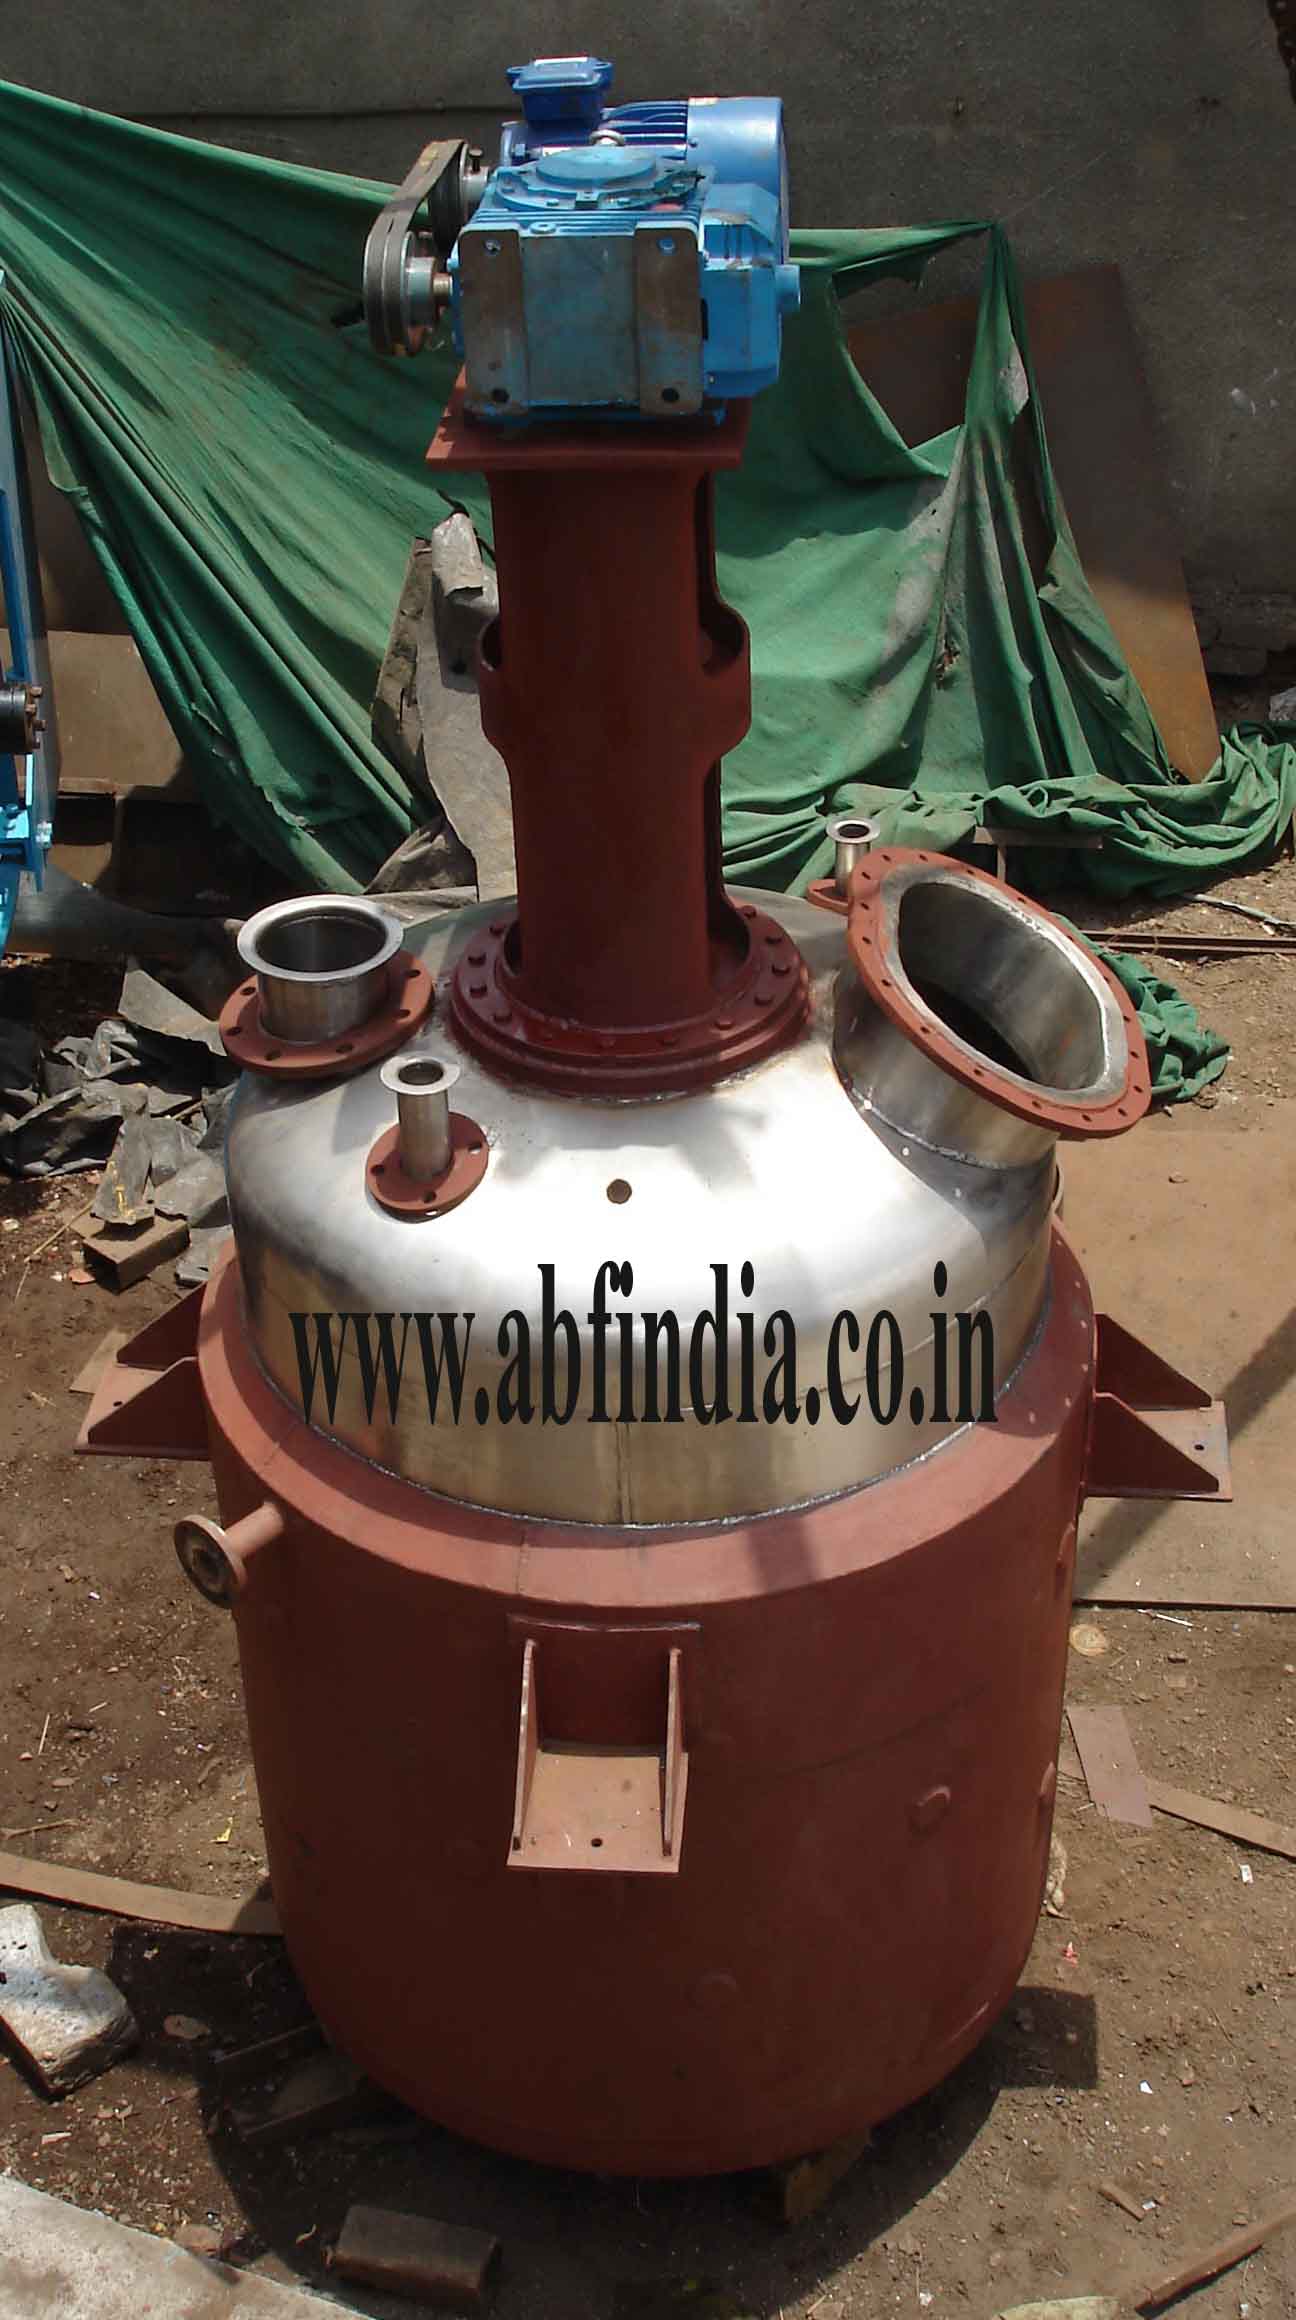 stainless steel reaction vessel